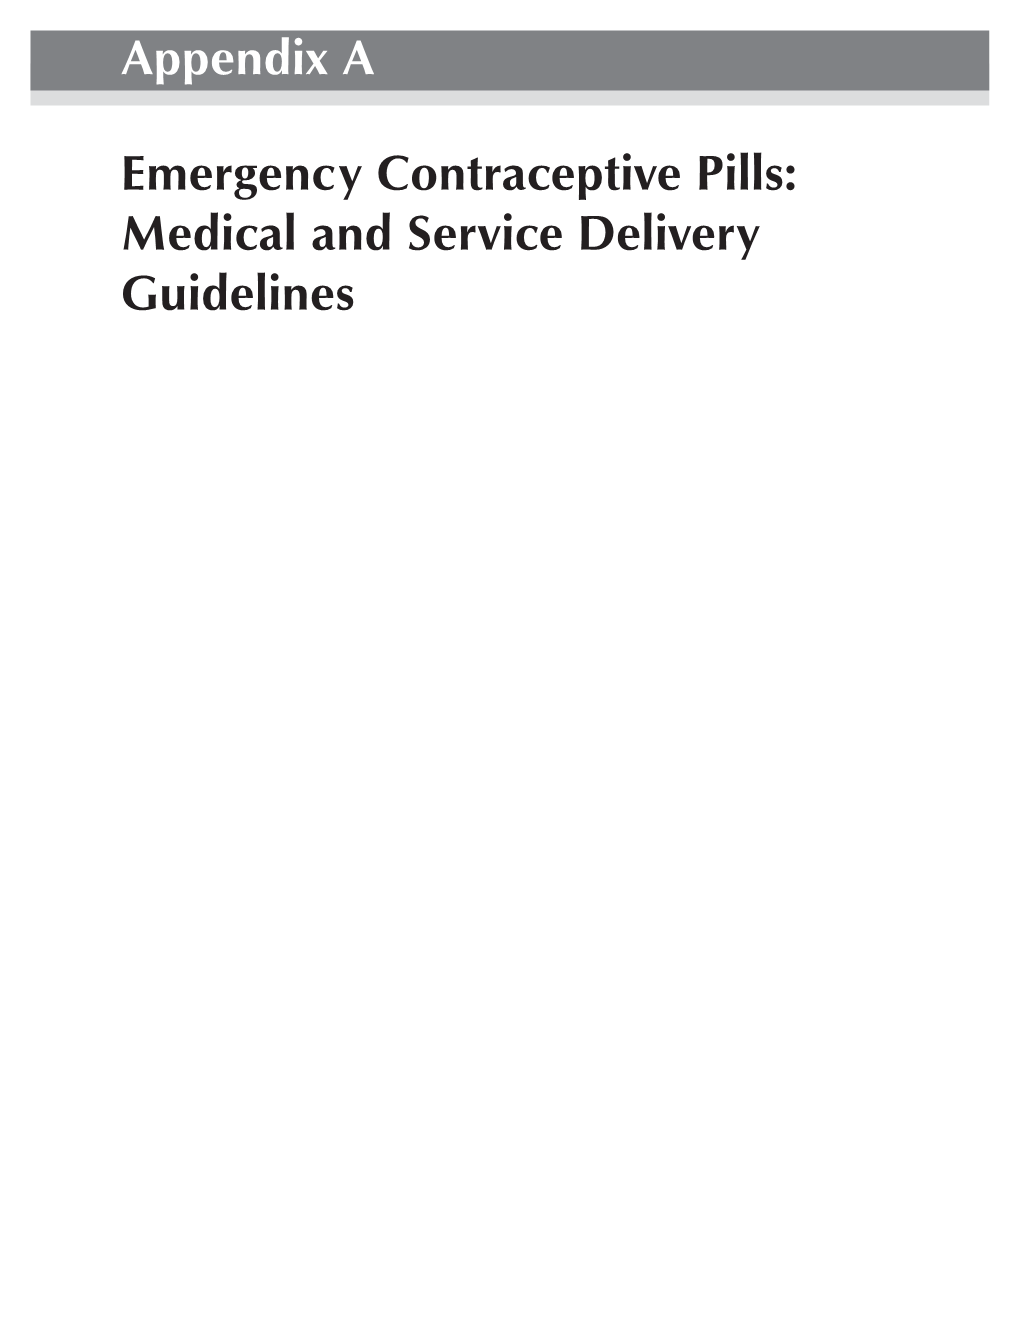 Resources for Emergency Contraceptive Pill Programming: A